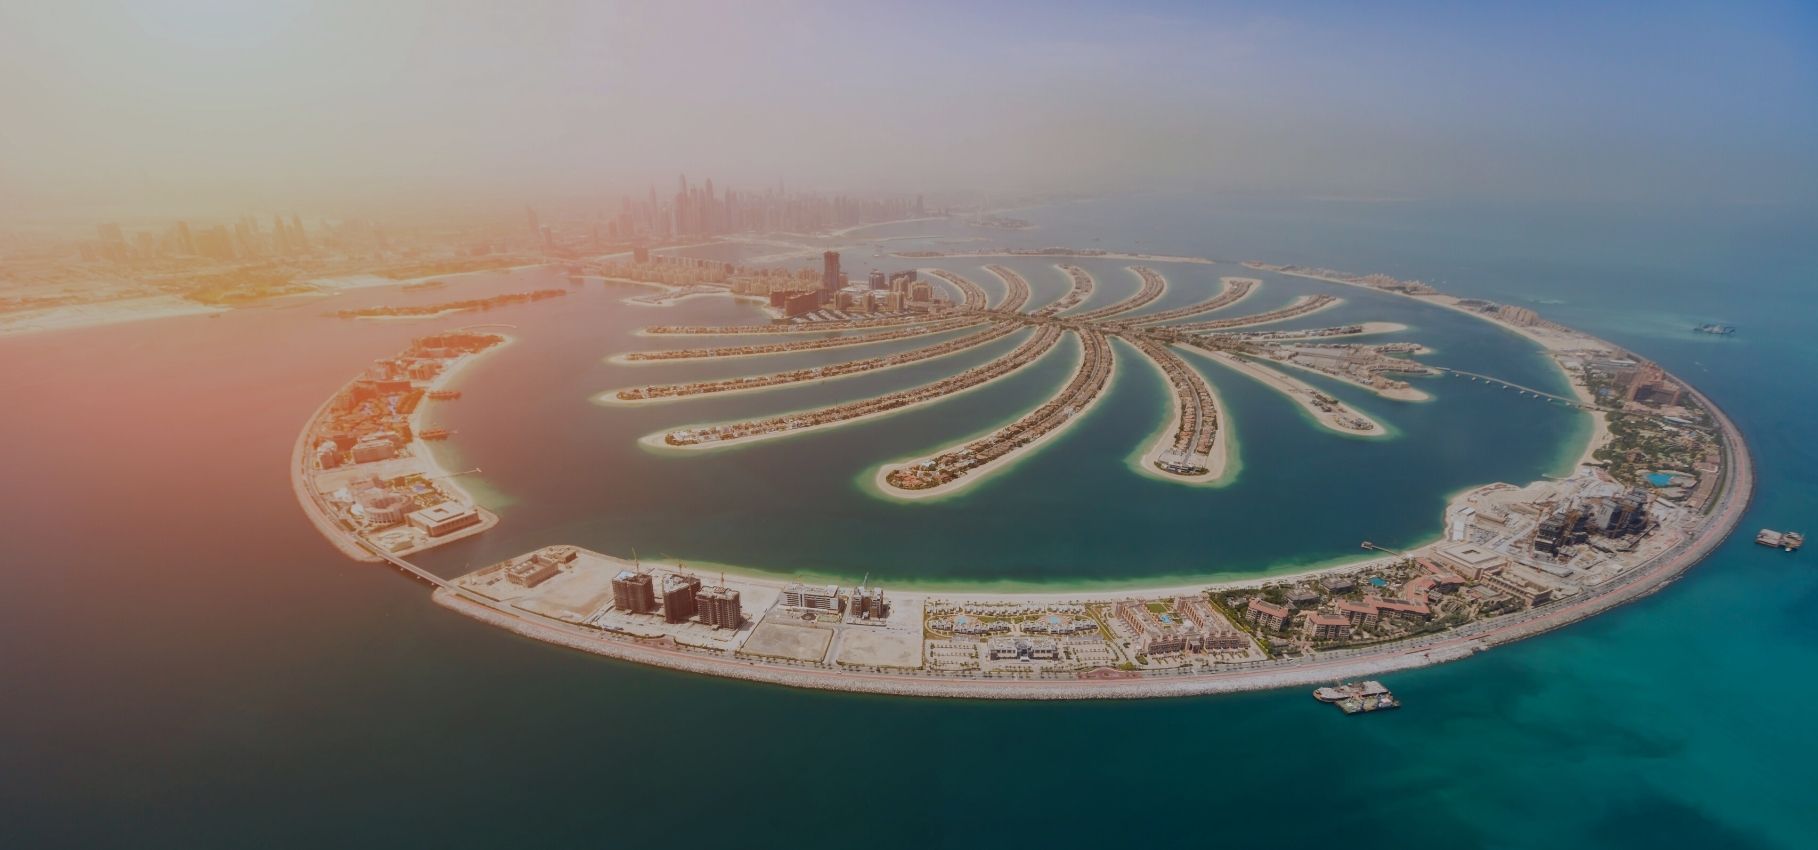 10 Top Destinations to See in Dubai